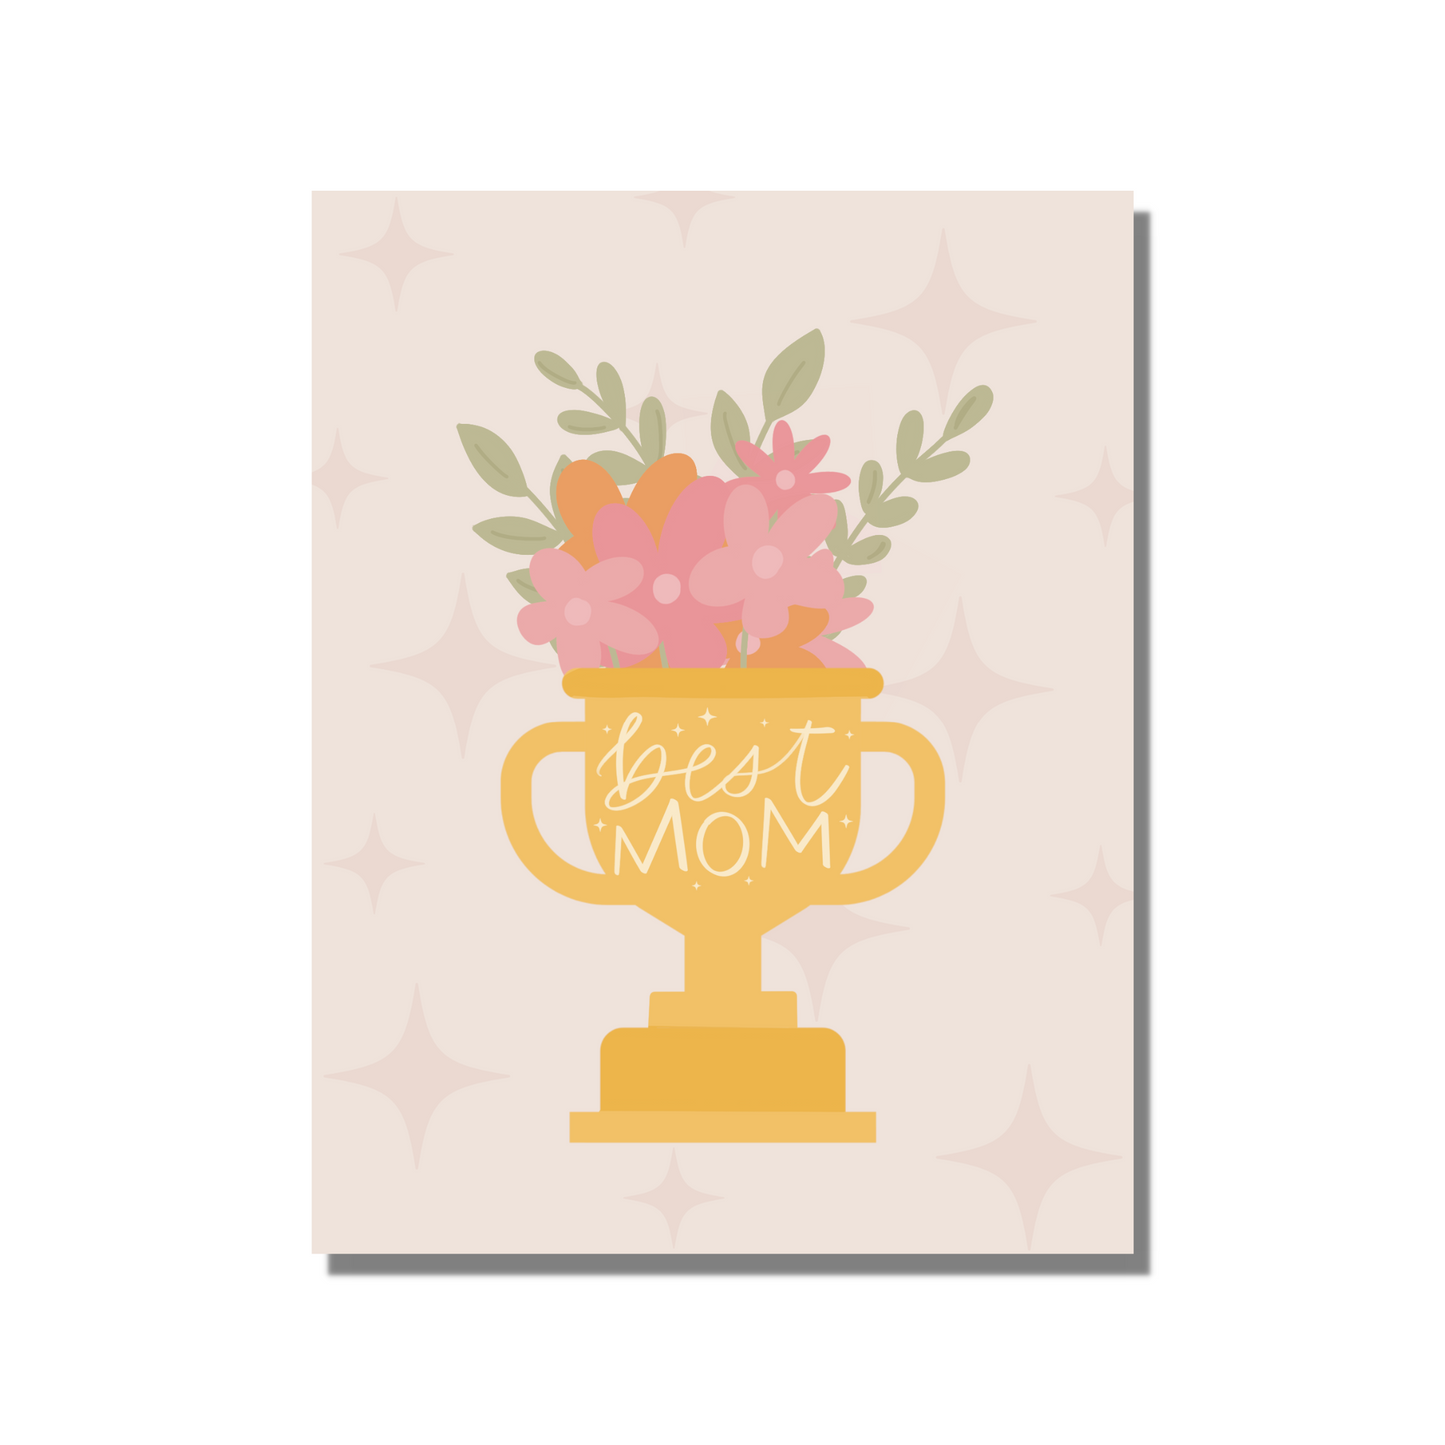 Best Mom Ever Mother's Day Greeting Card